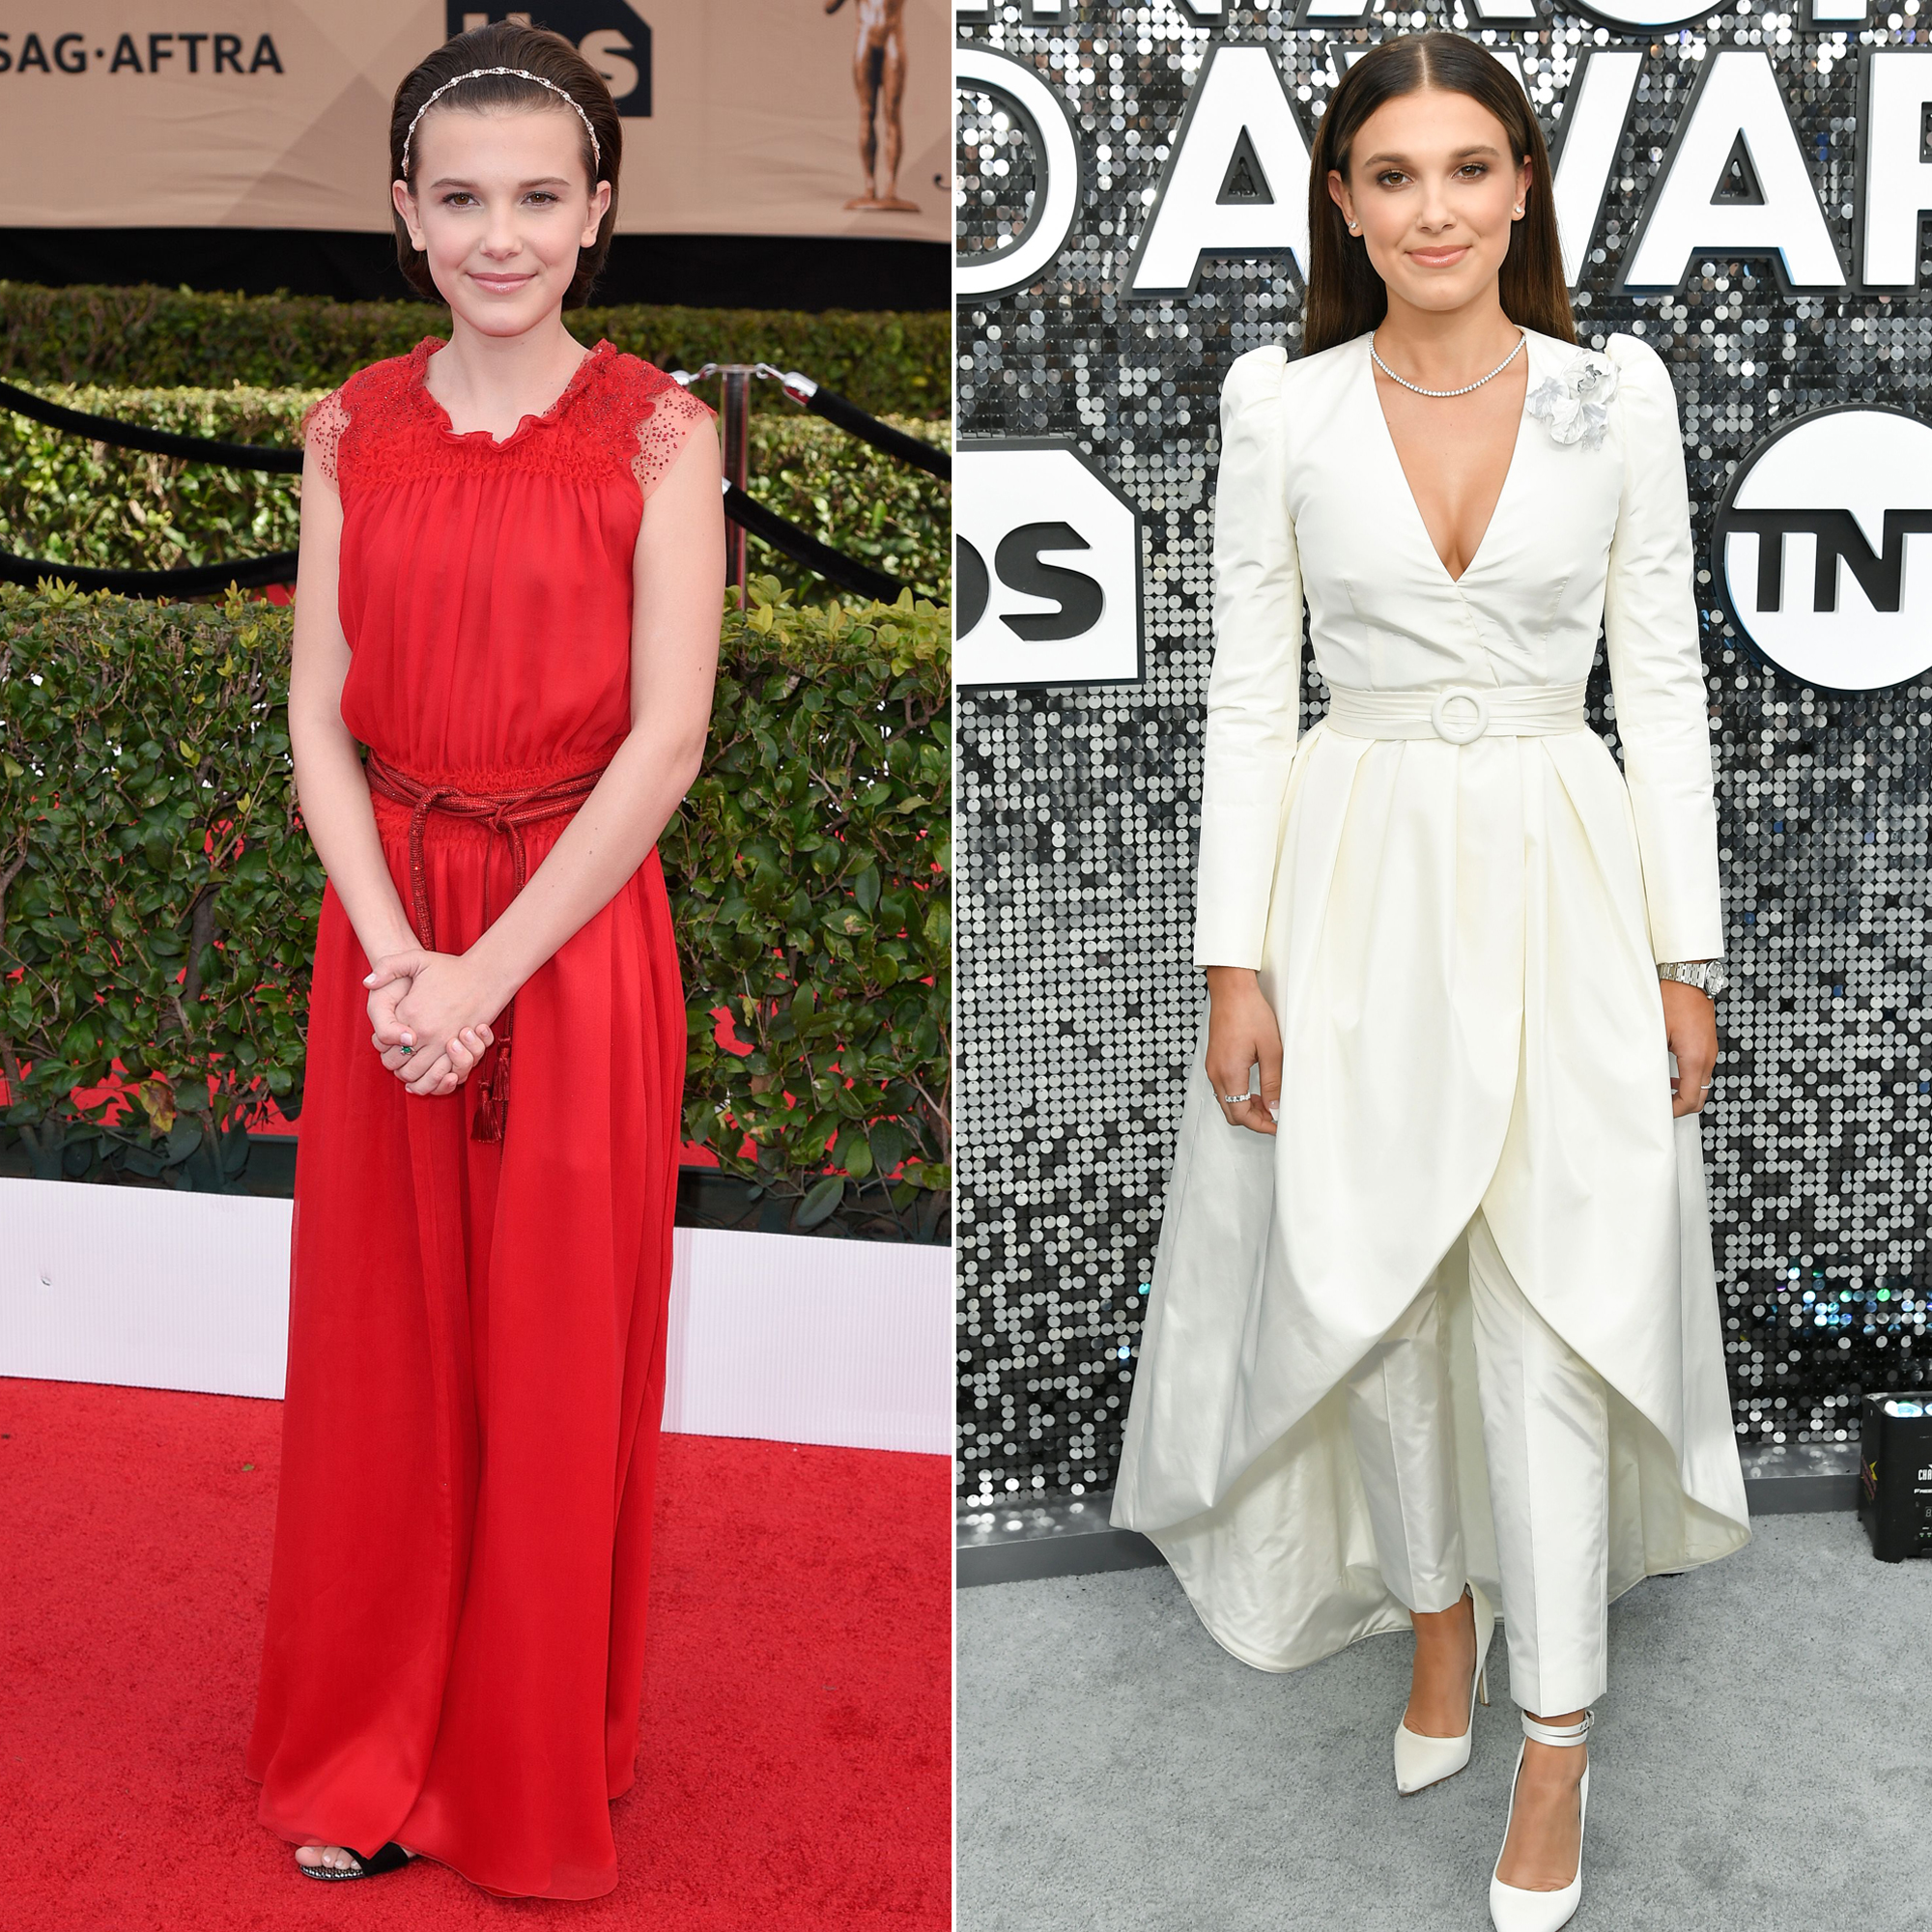 Stranger Things Kids At Their 1st Sag Awards Compared To 2020